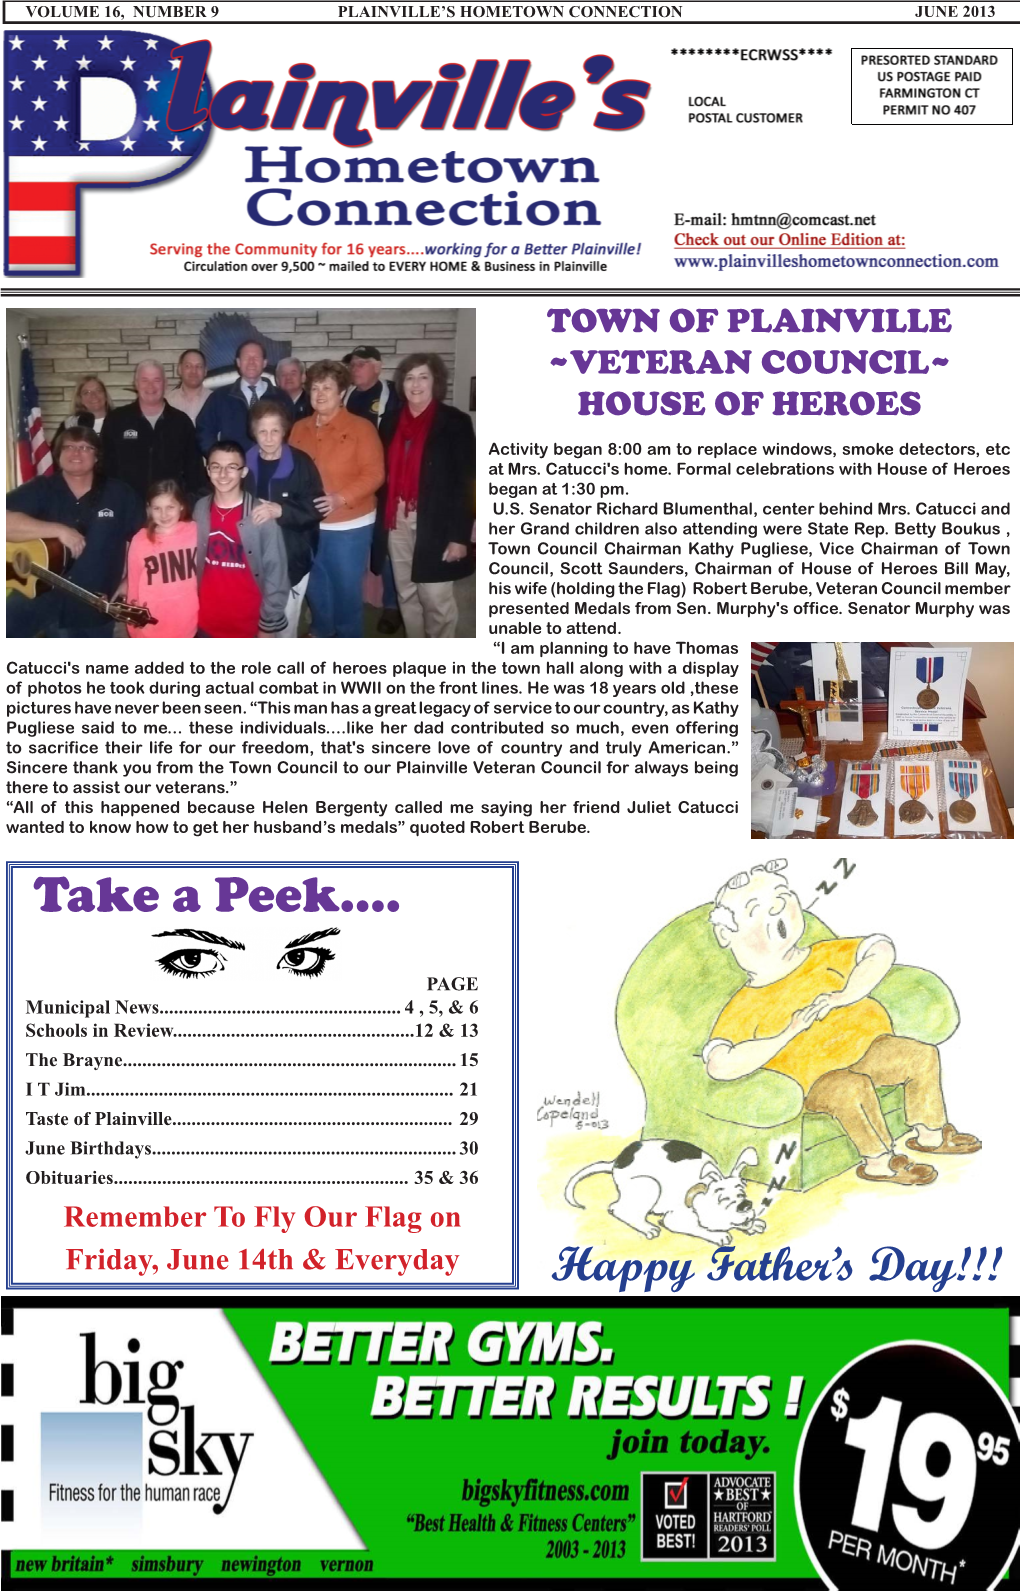 Town of Plainville ~Veteran Council~ House of Heroes